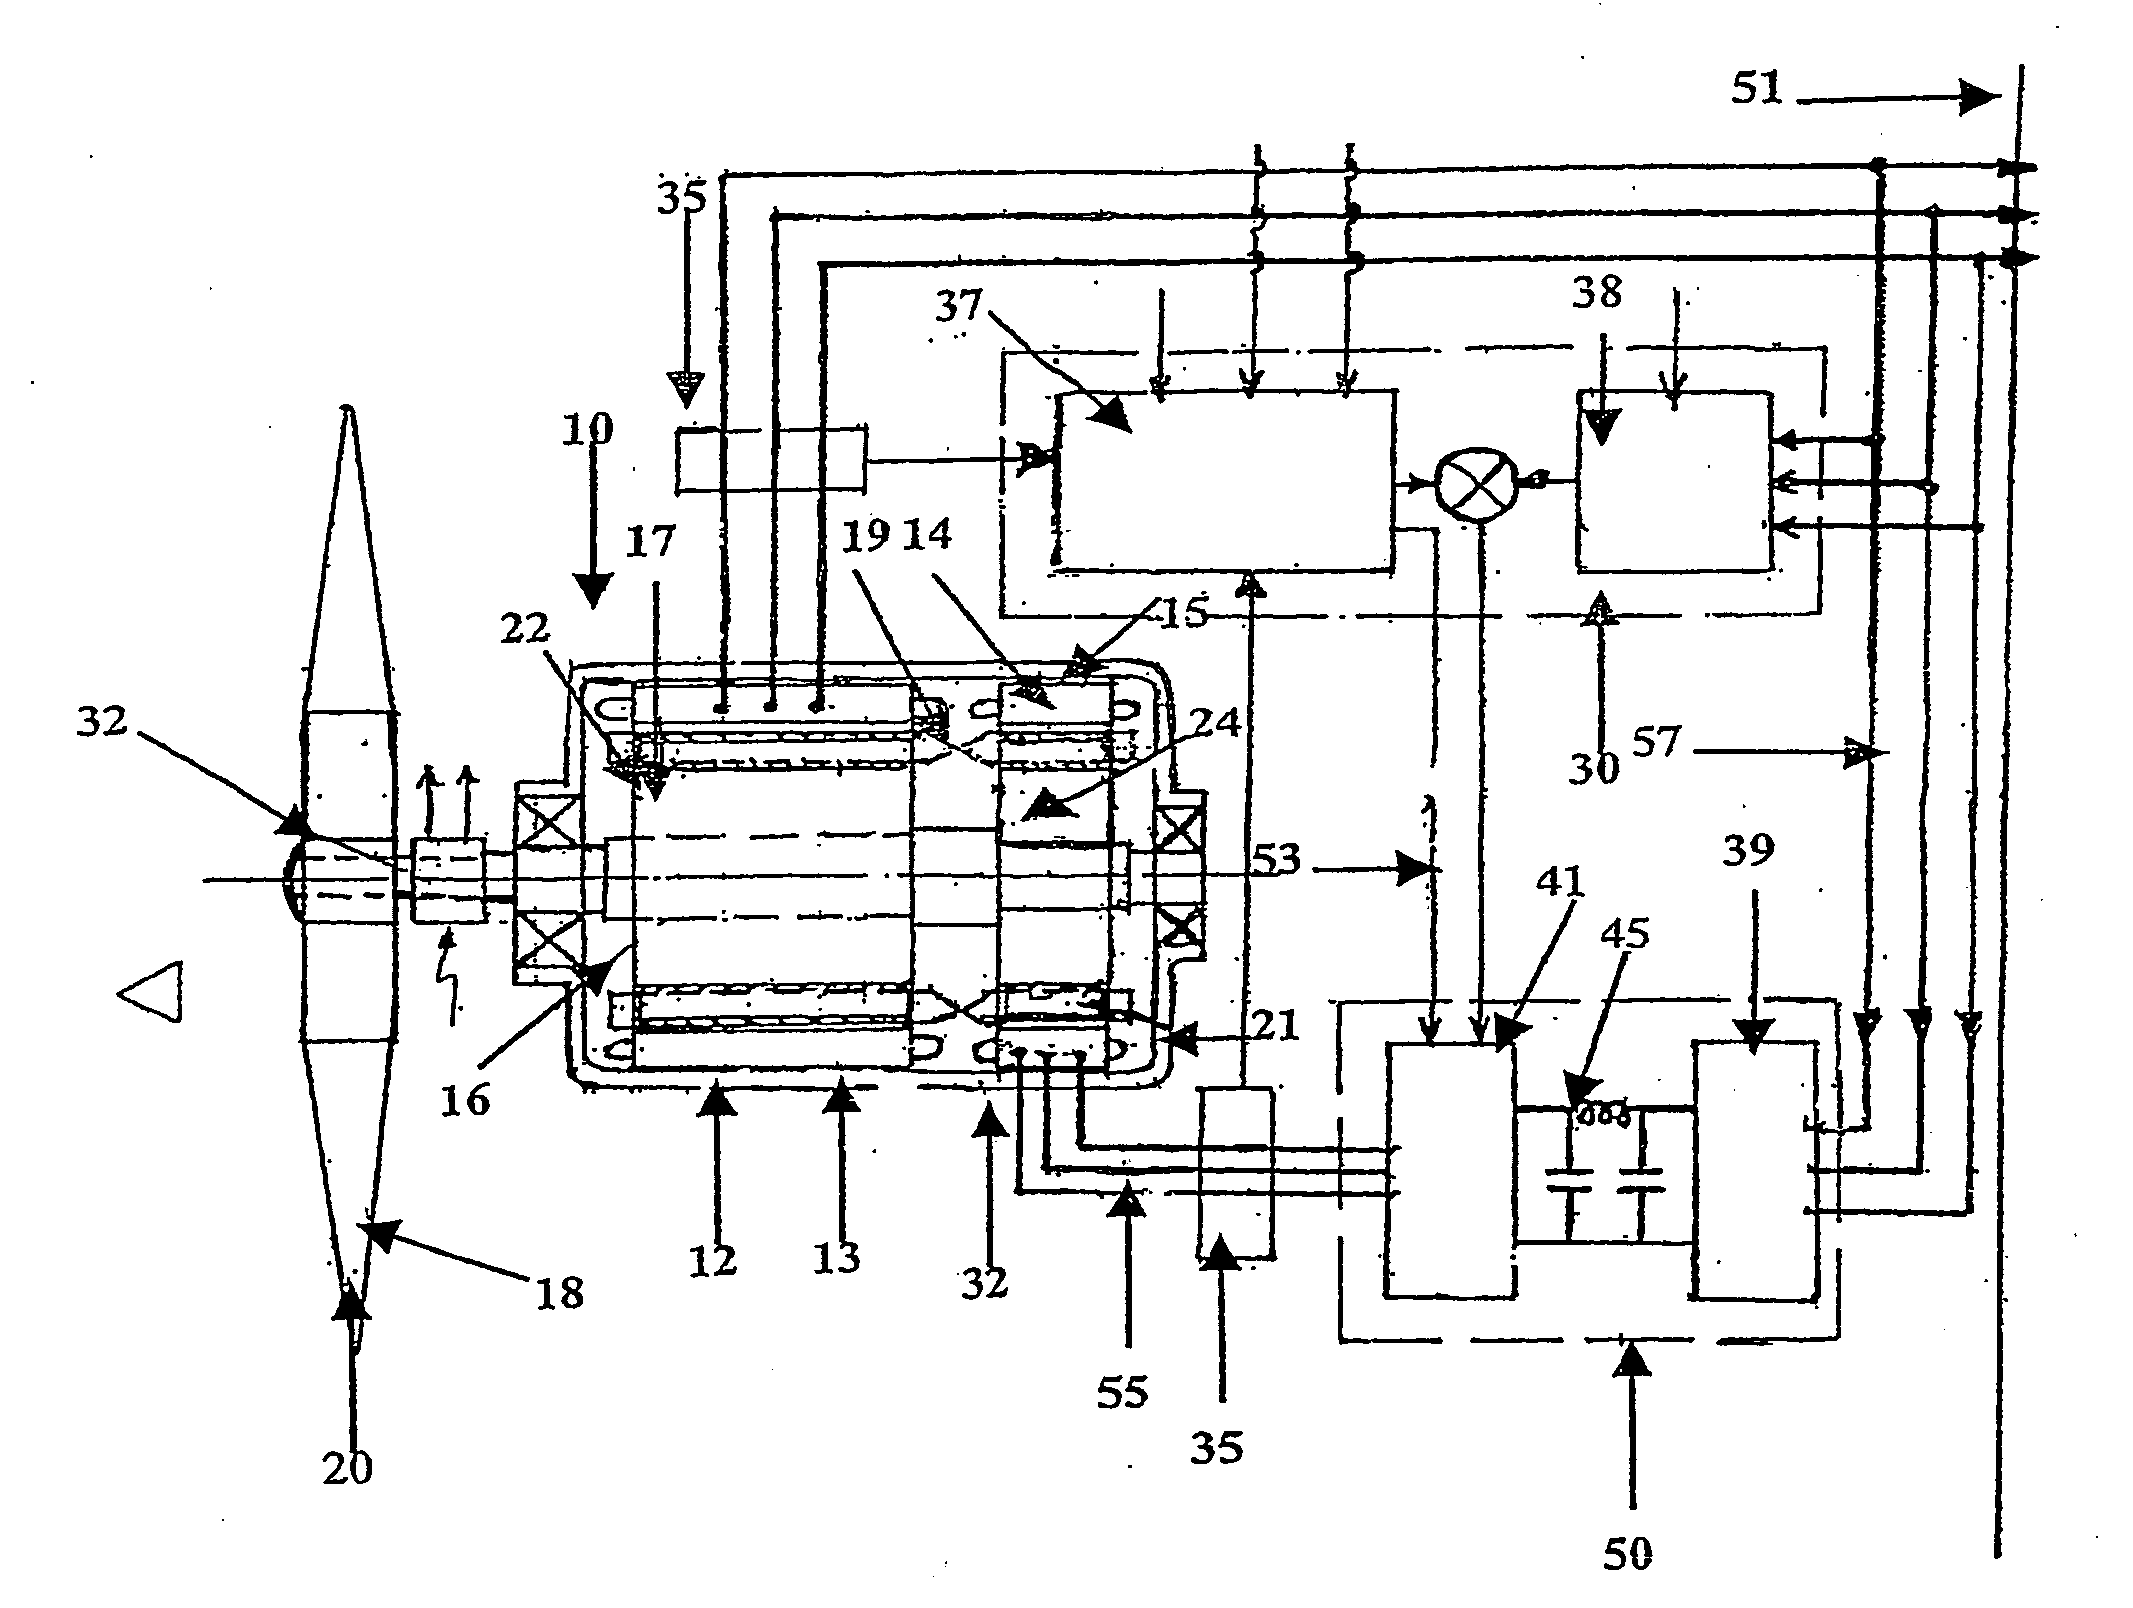 Variable speed power generator having two induction generators on a common shaft